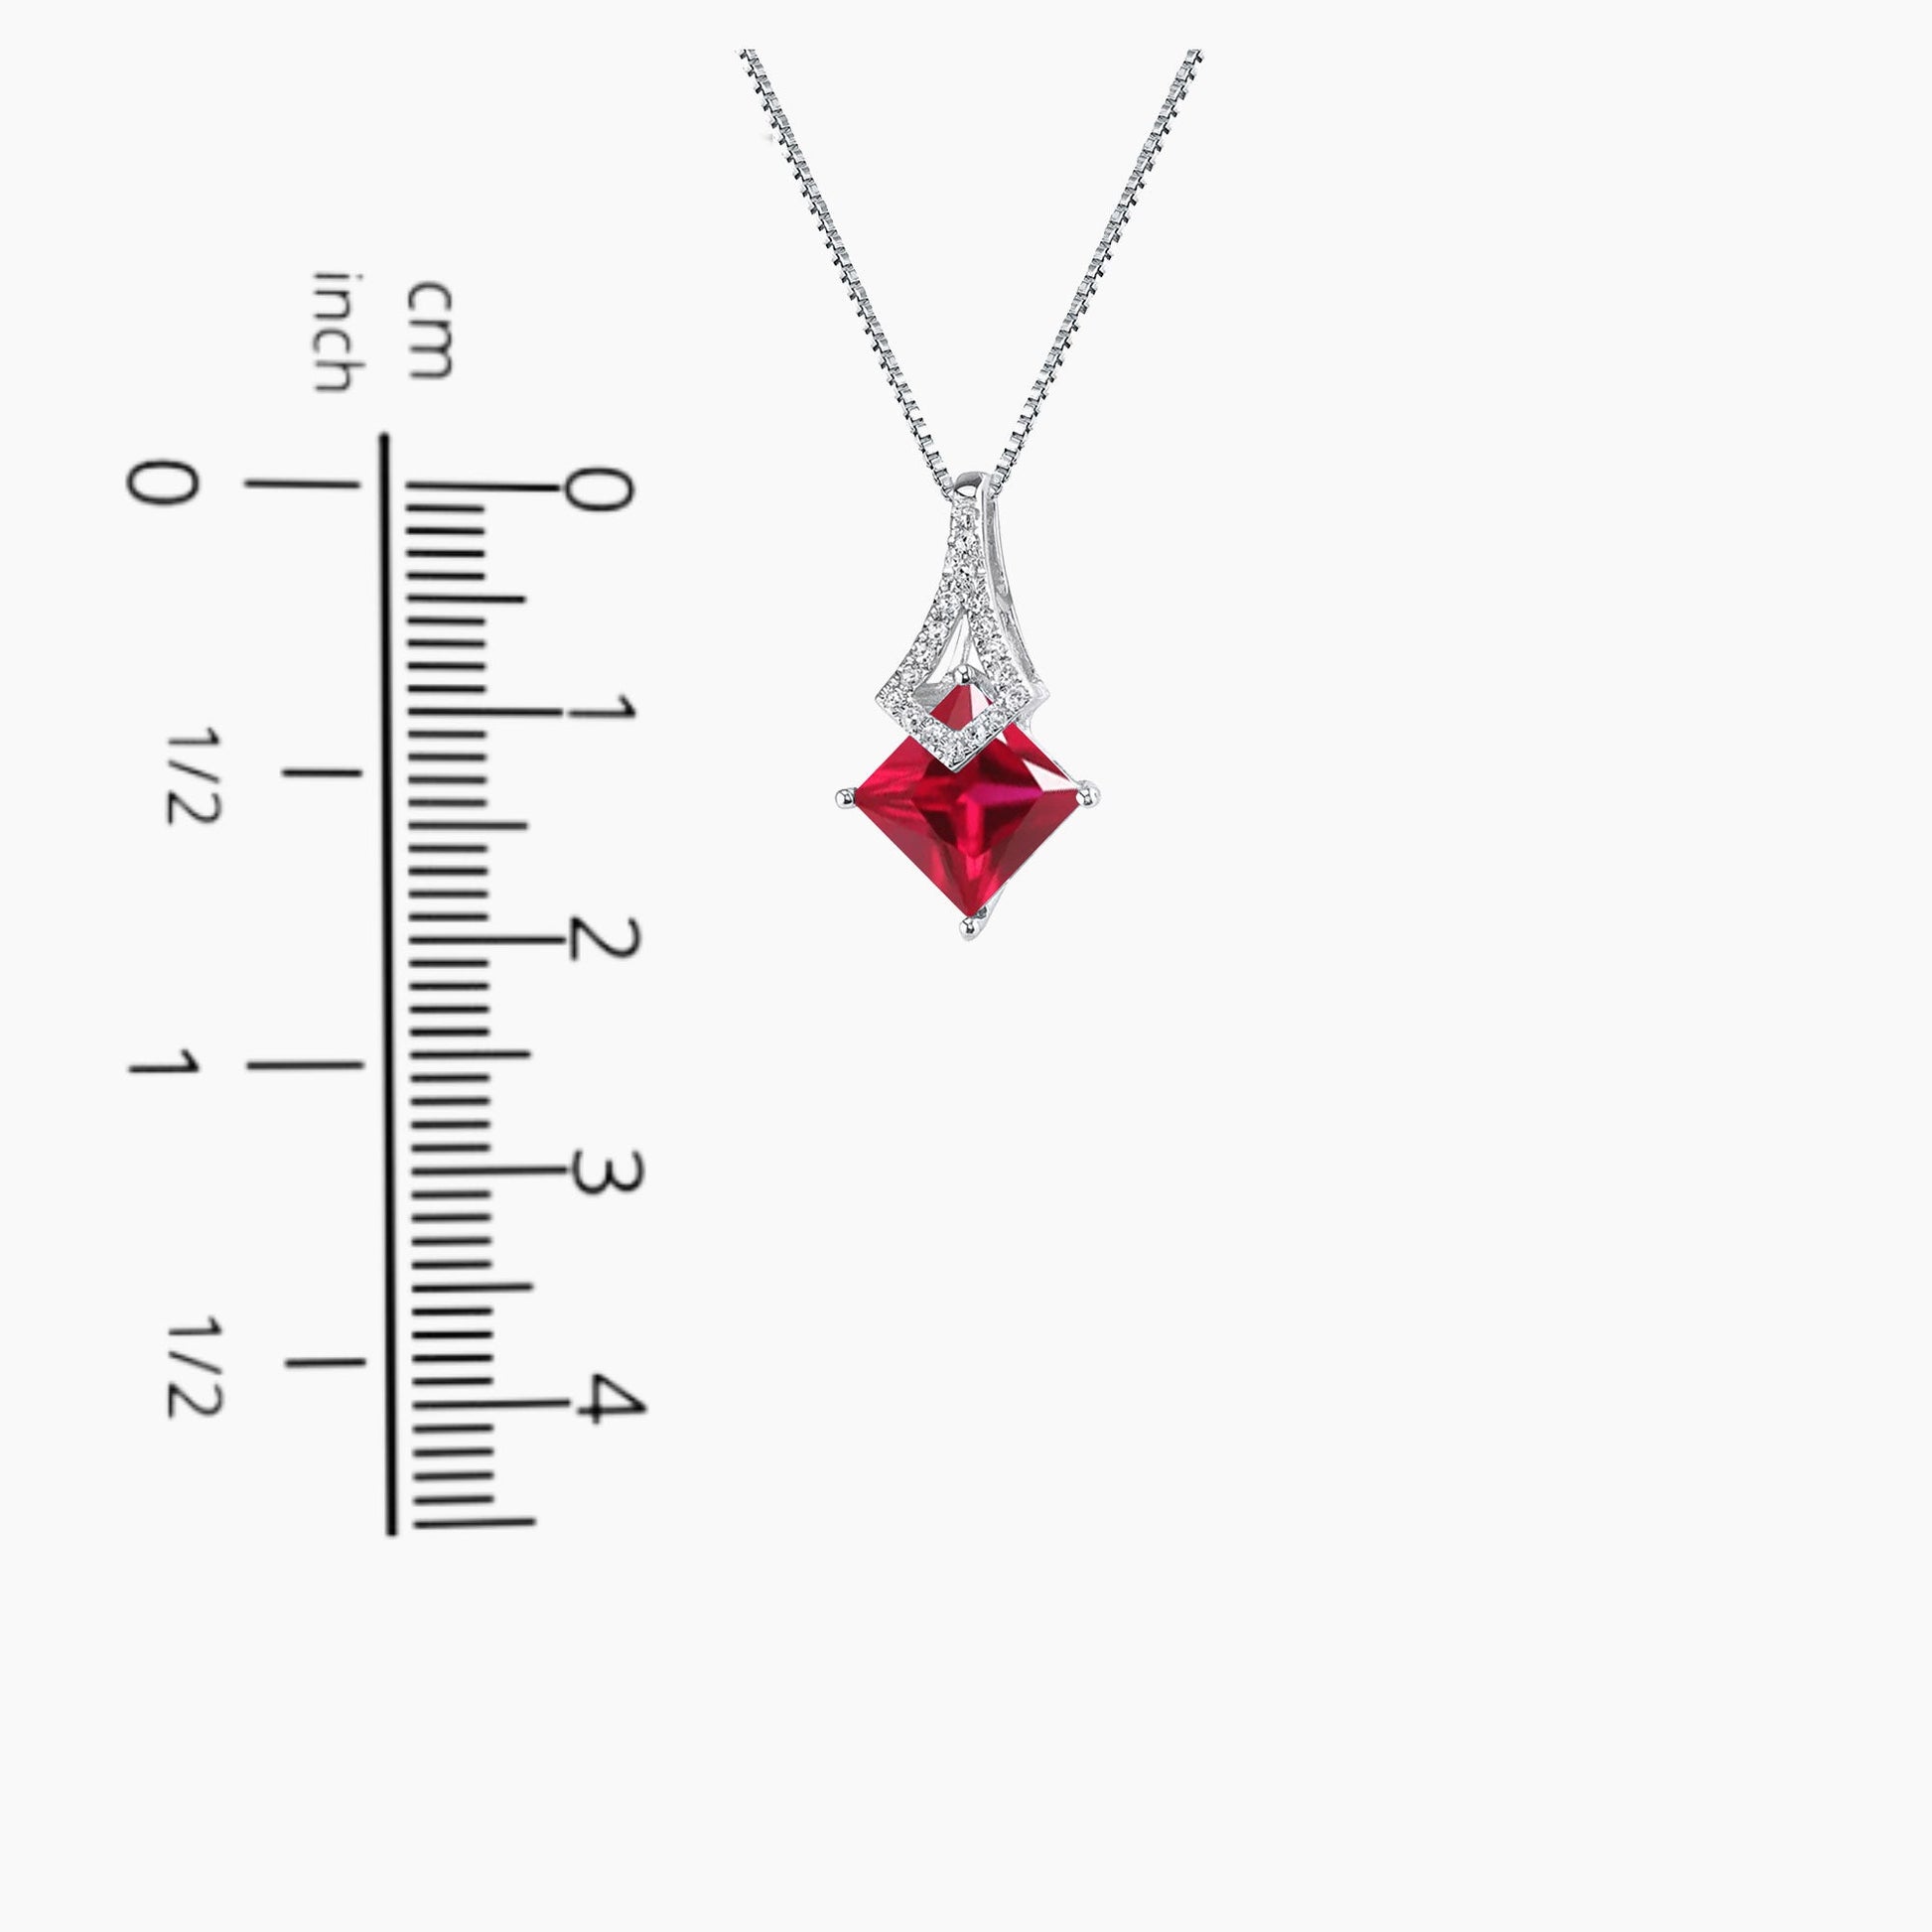  Find your perfect fit with our Princess Cut Pendant Necklace sizing guide.